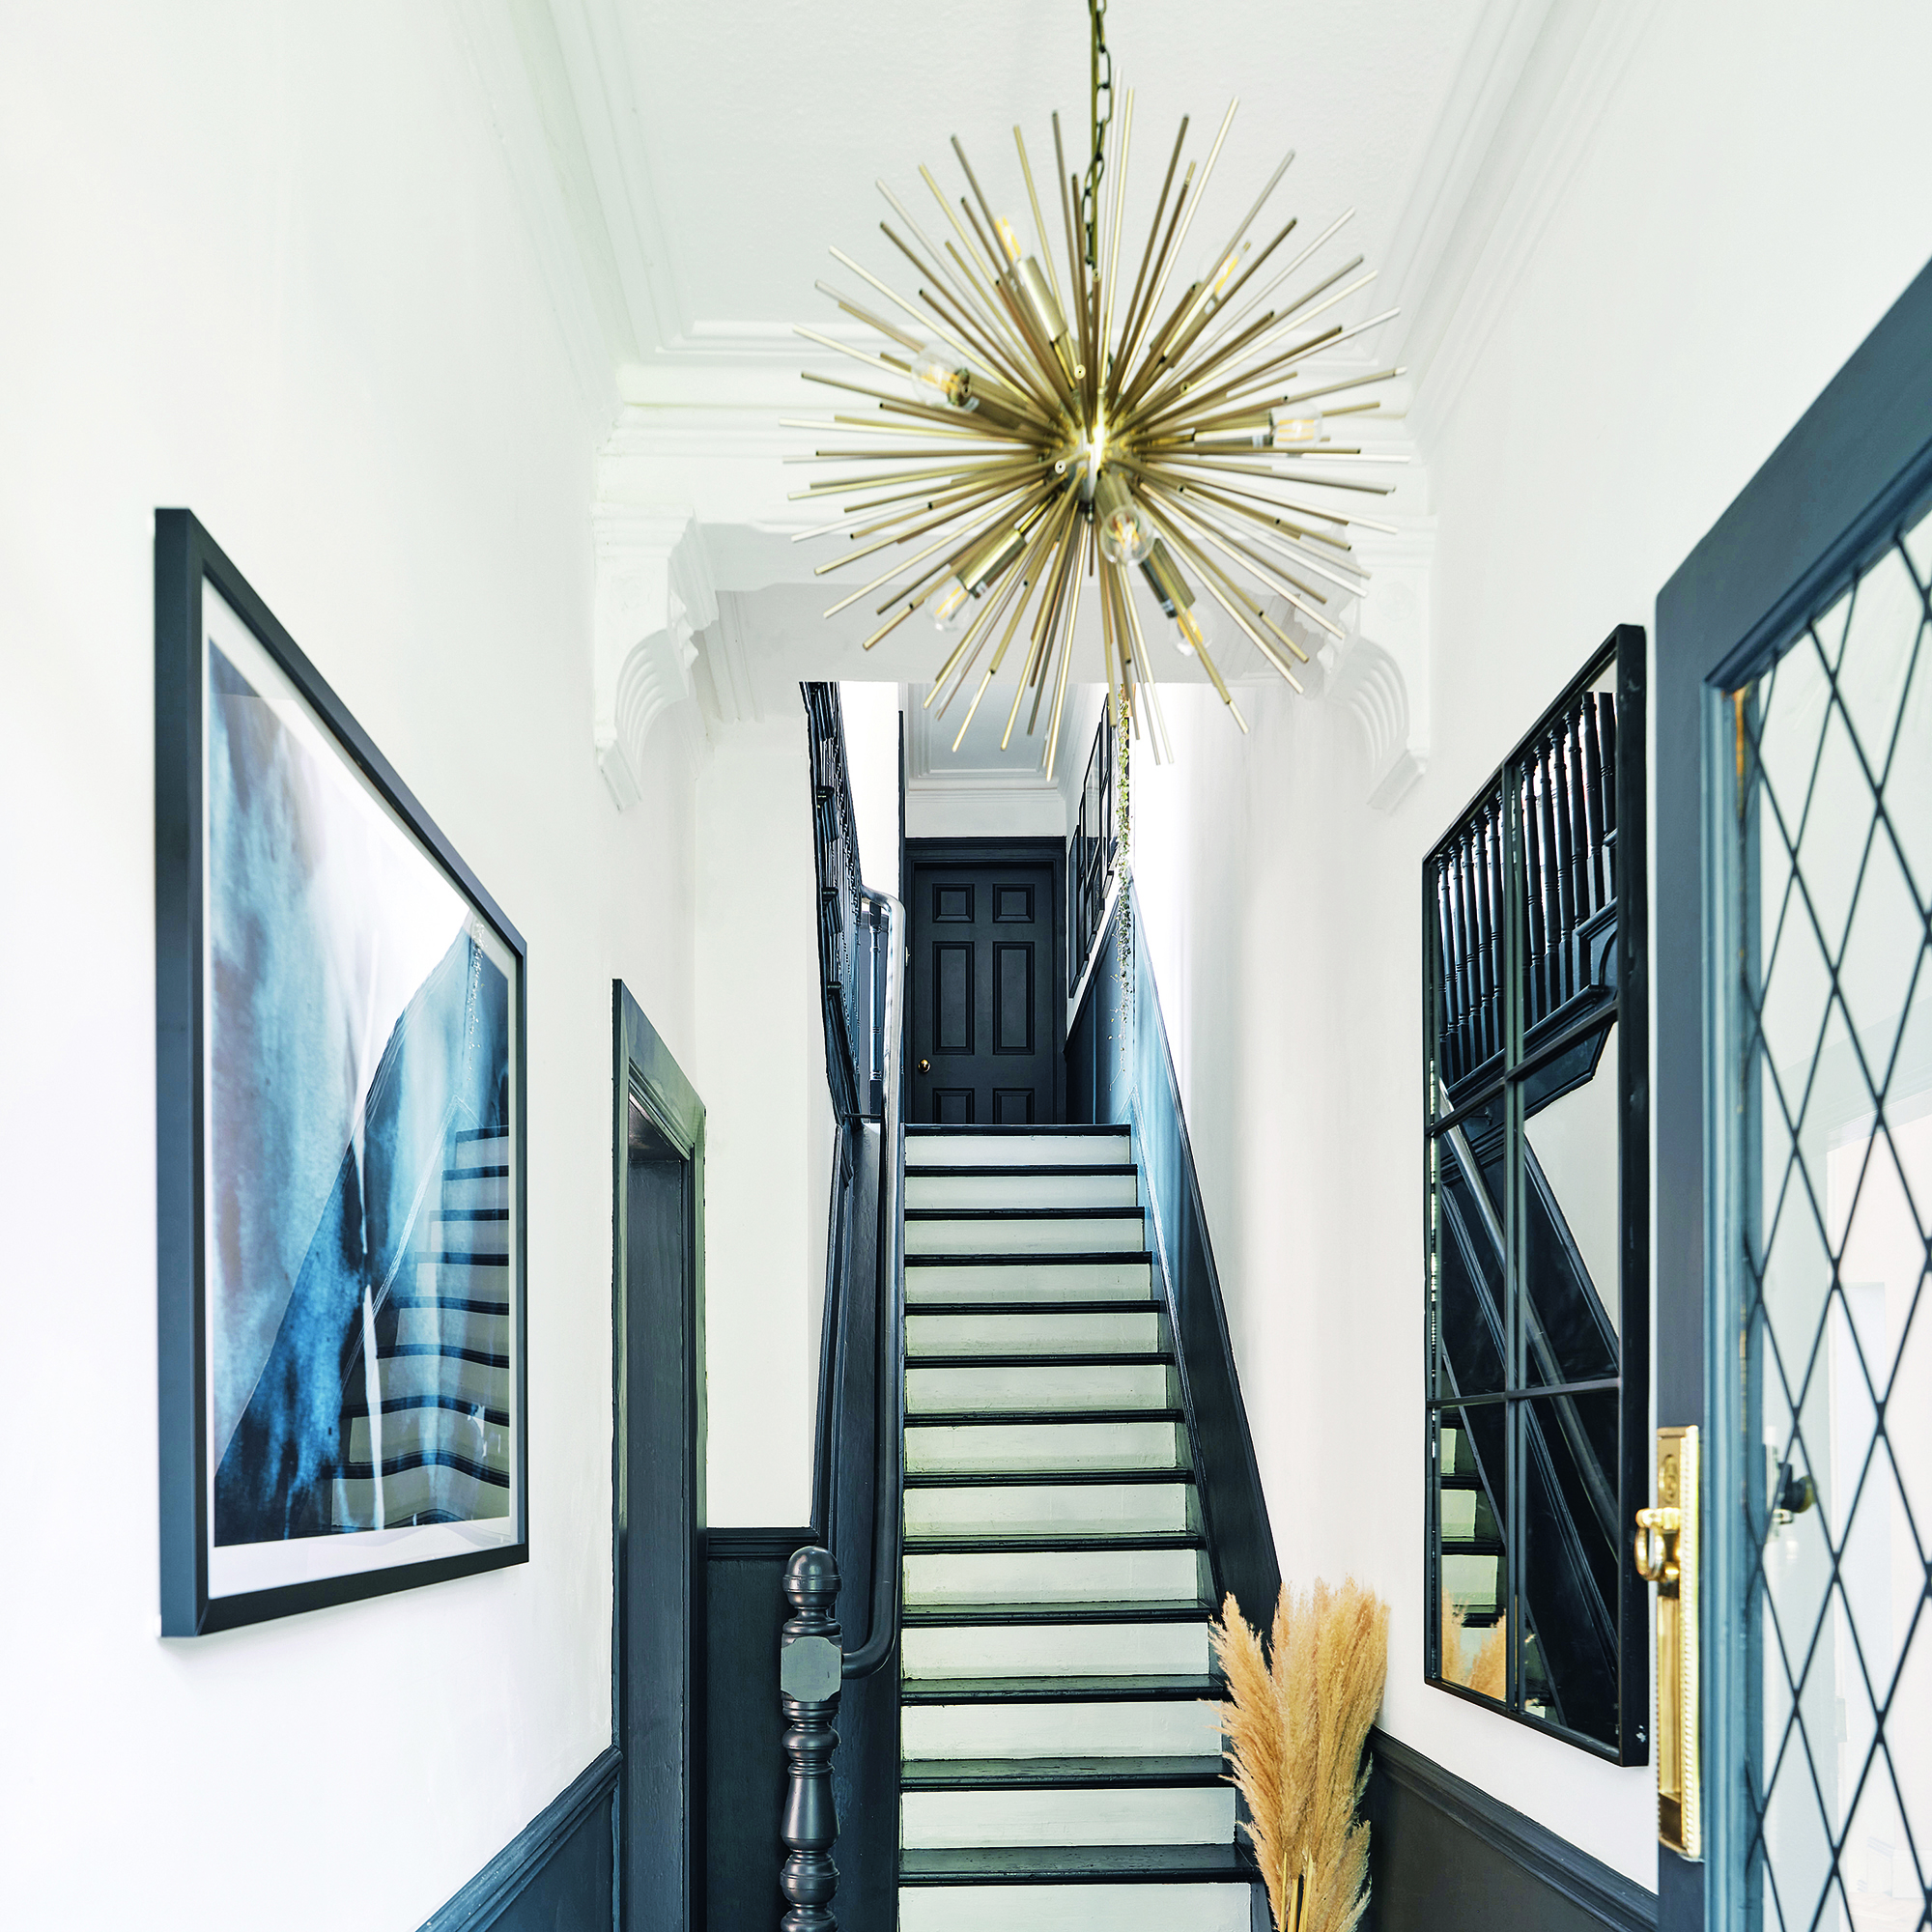 Hallway with navy accents and large pendant light.